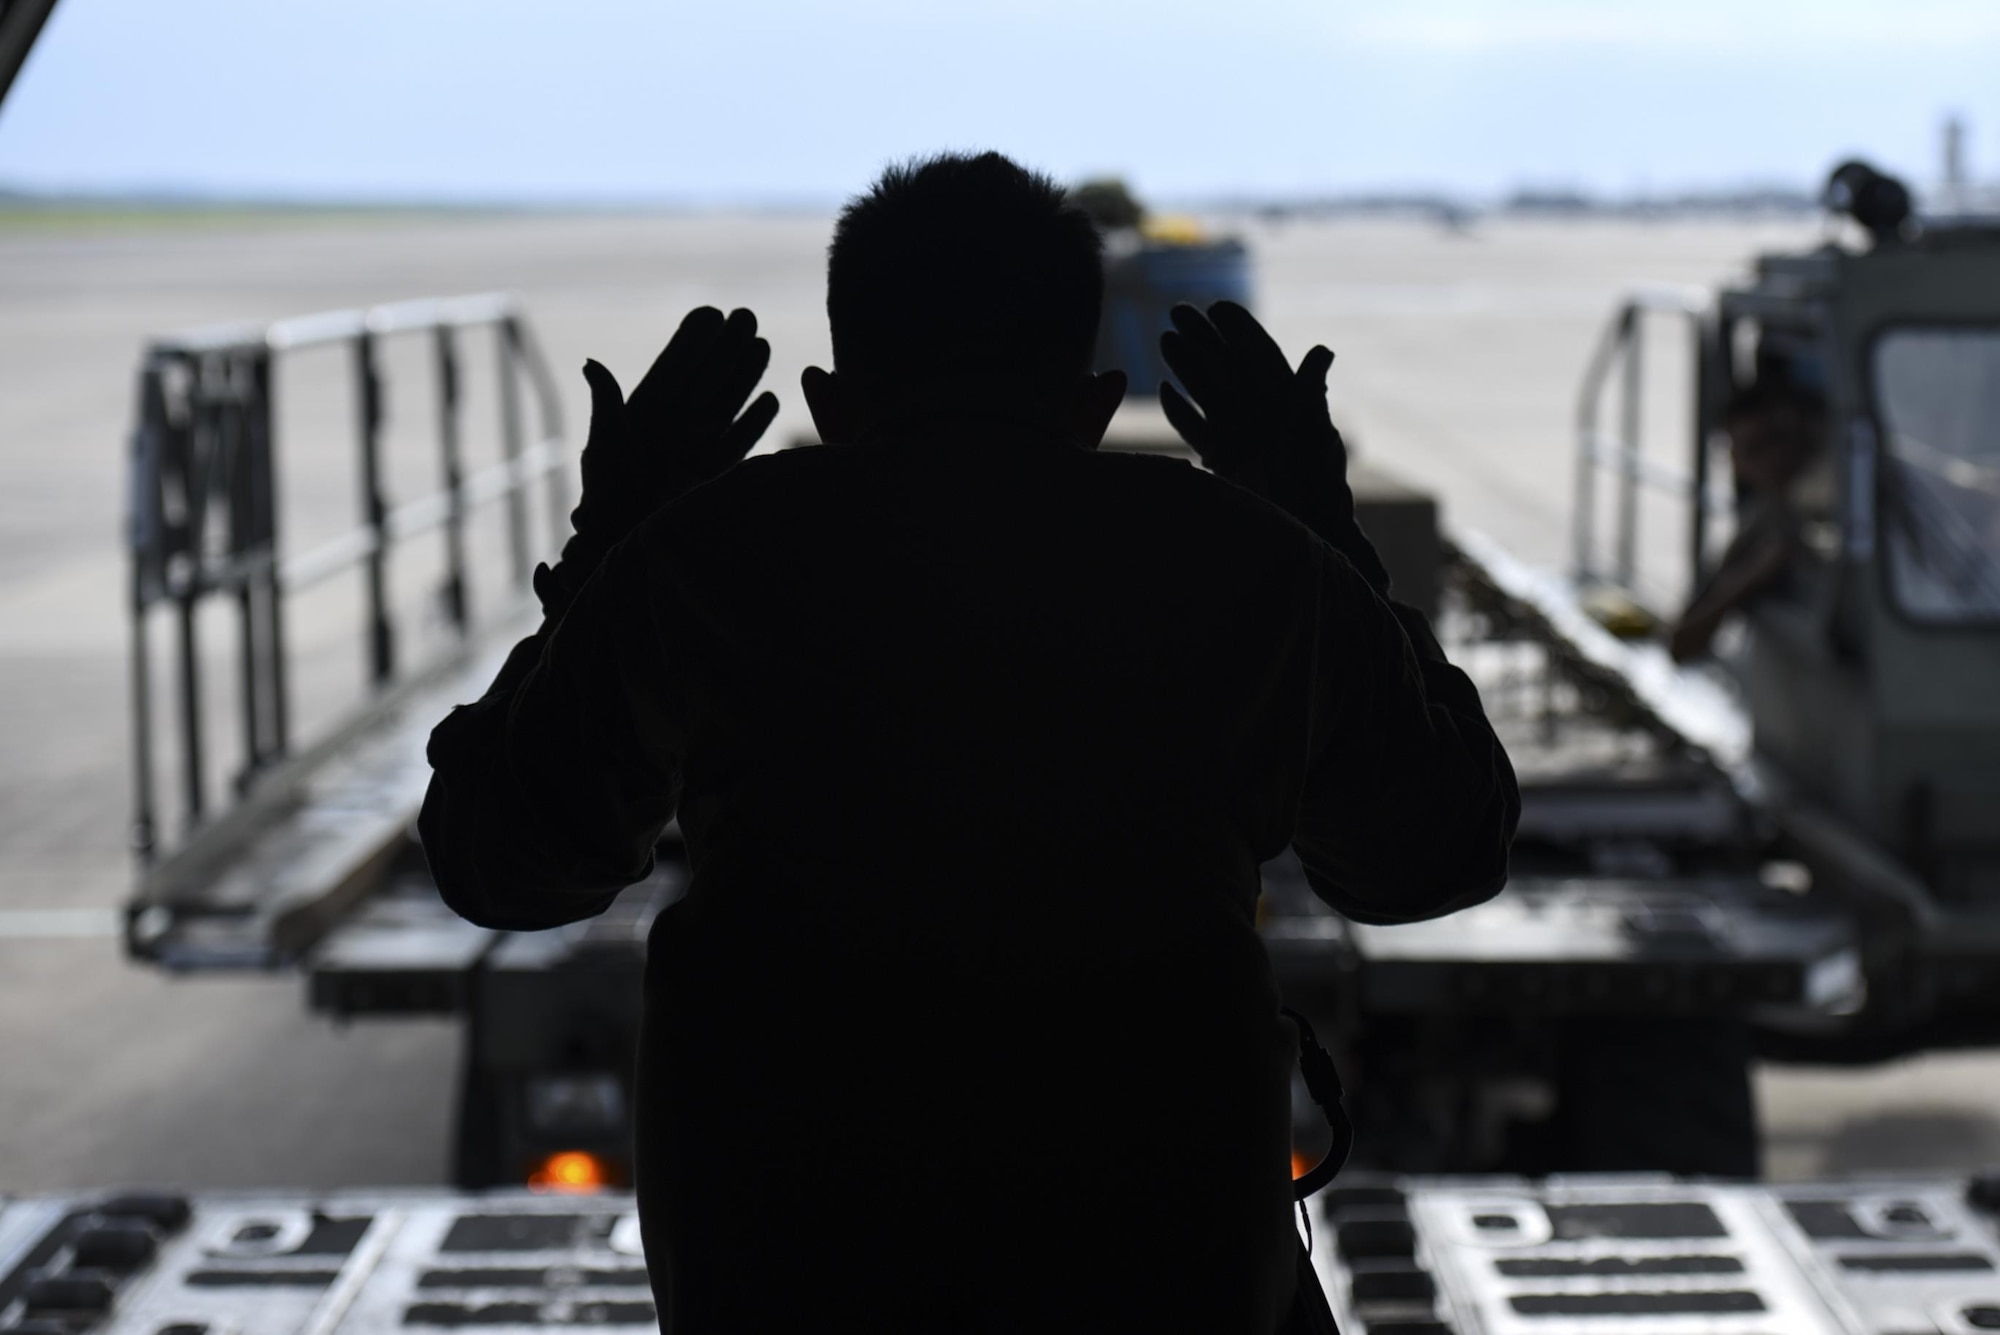 Senior Airman Jaypeter Tuazon, 61st Airlift Squadron loadmaster, loads training weights and a container delivery system onto a C-130J, Aug. 1, 2017, at Little Rock Air Force Base, Ark. Loadmasters manage the loading and offloading of cargo while keeping the aircraft’s weight balanced and within flight limitations.